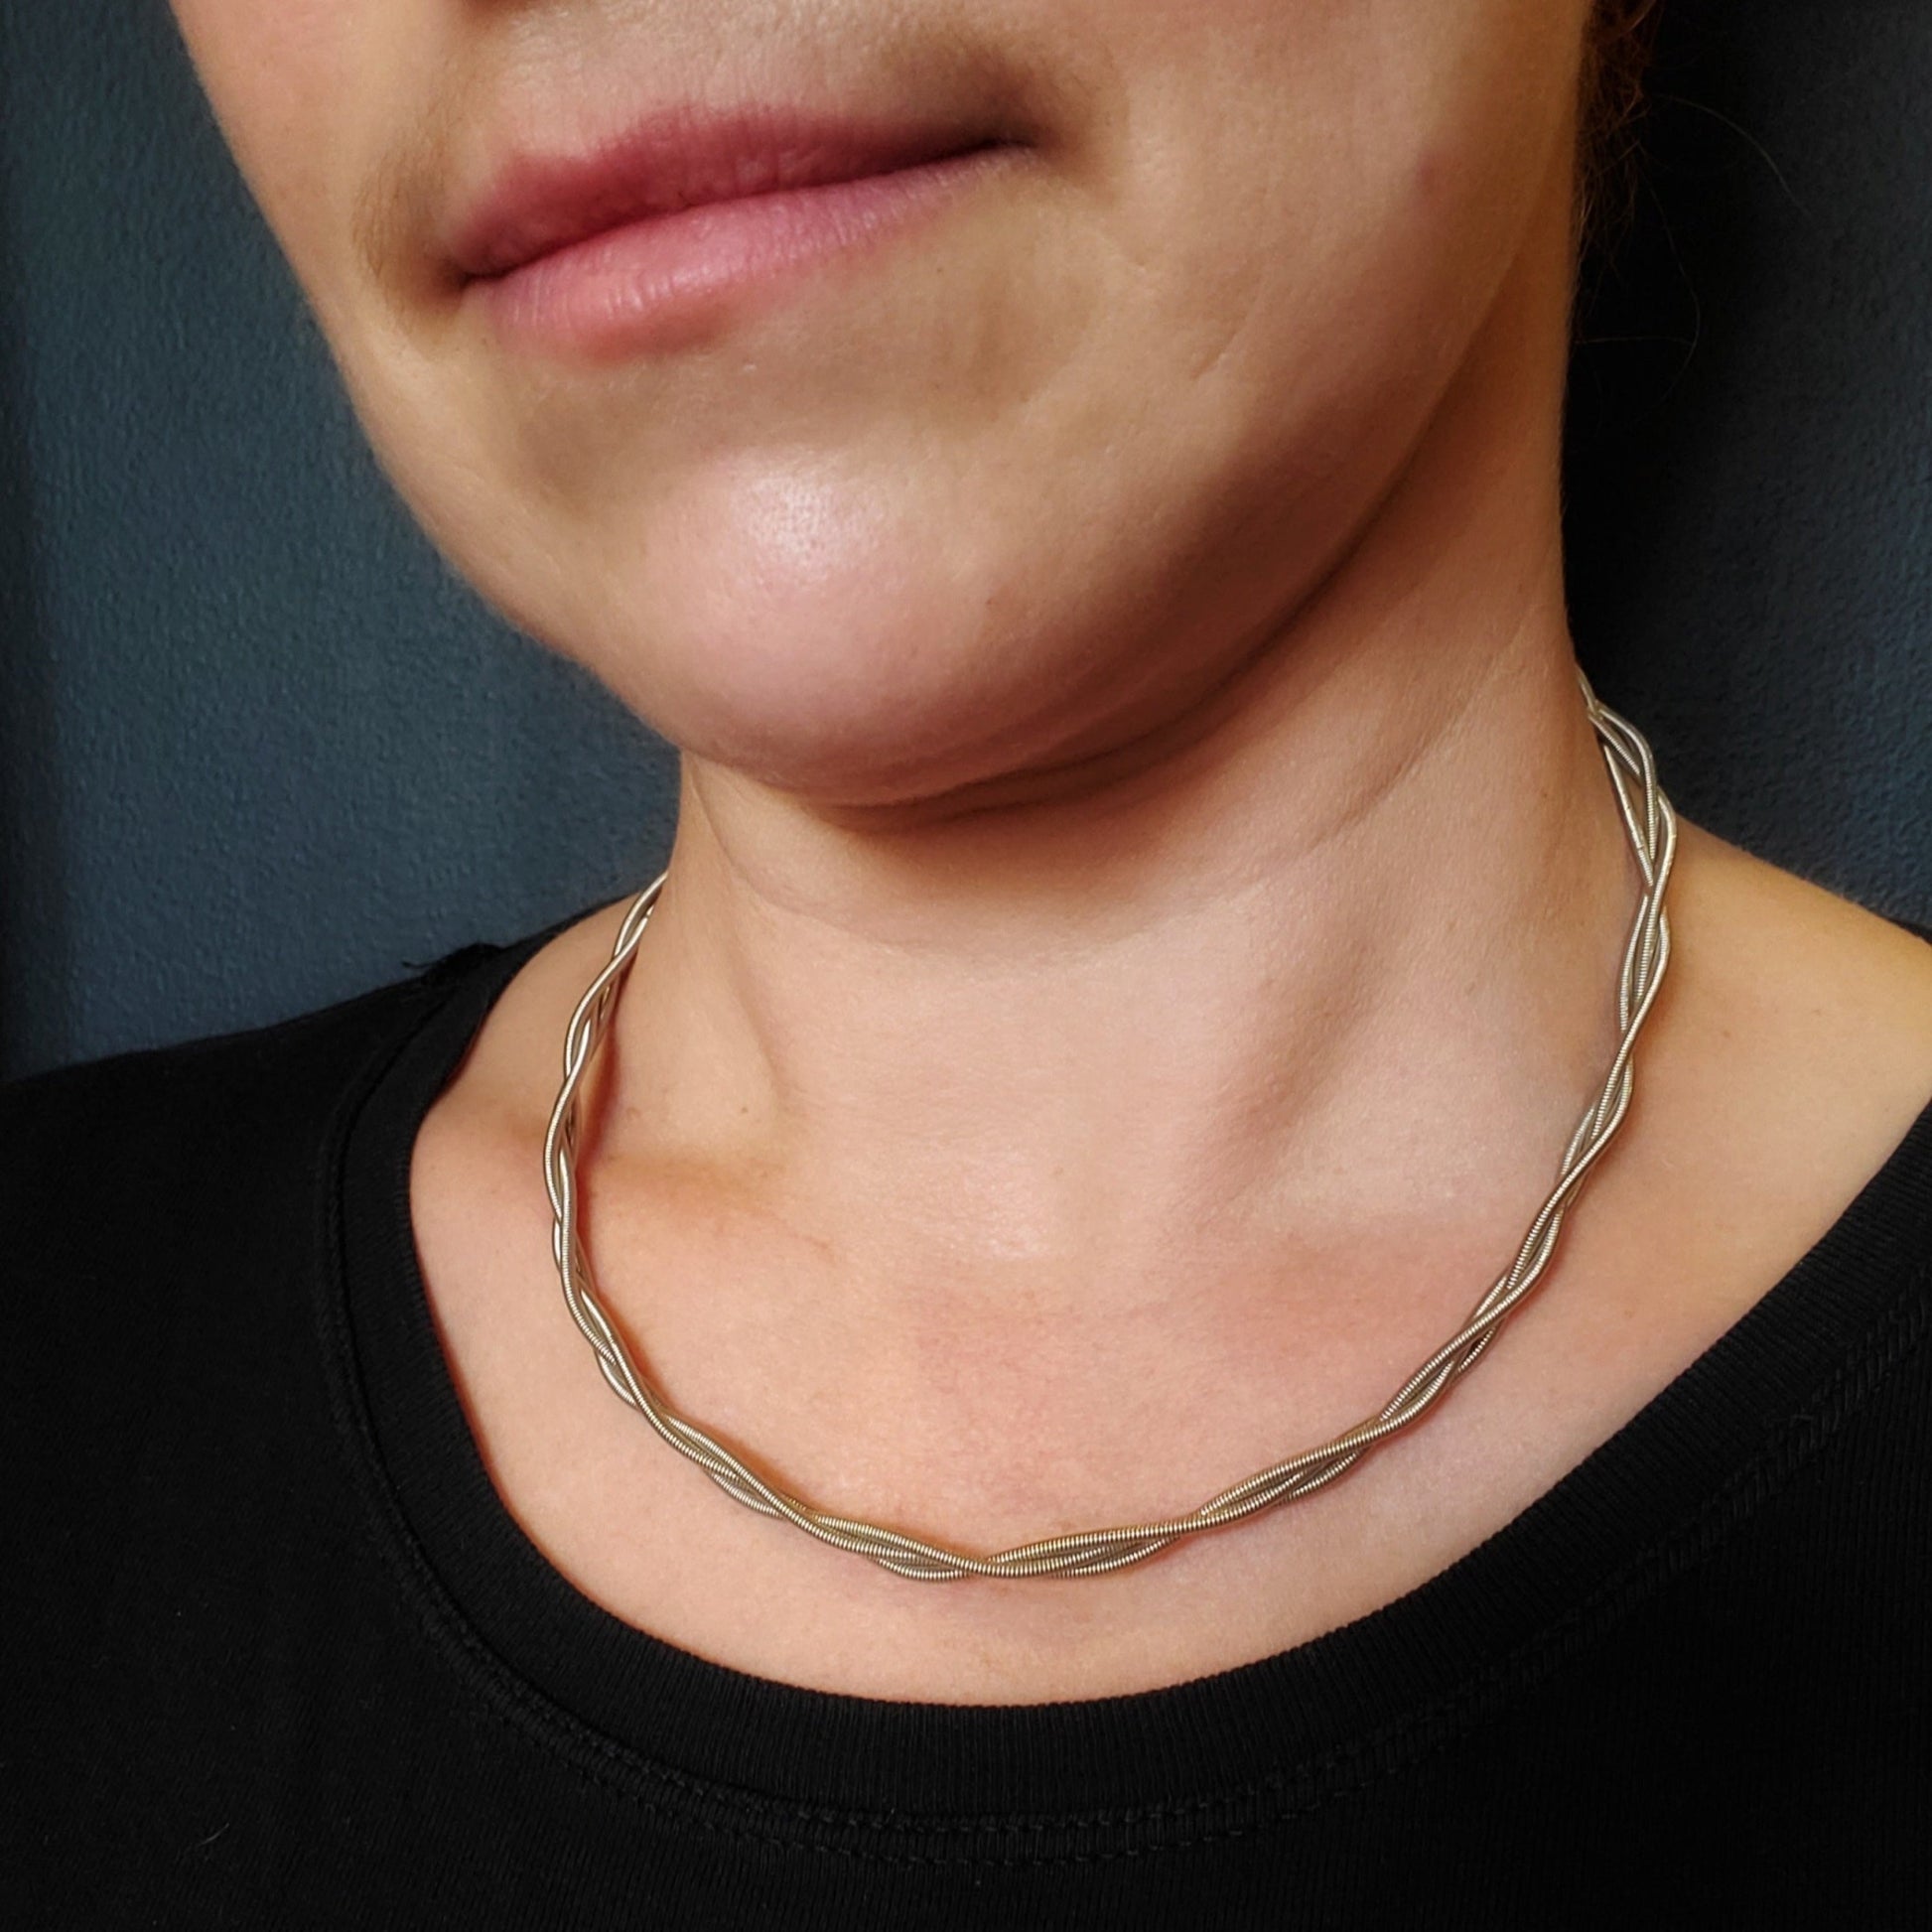 picture of a woman's neck wearing a silver coloured bass guitar string necklace (two string twisted).